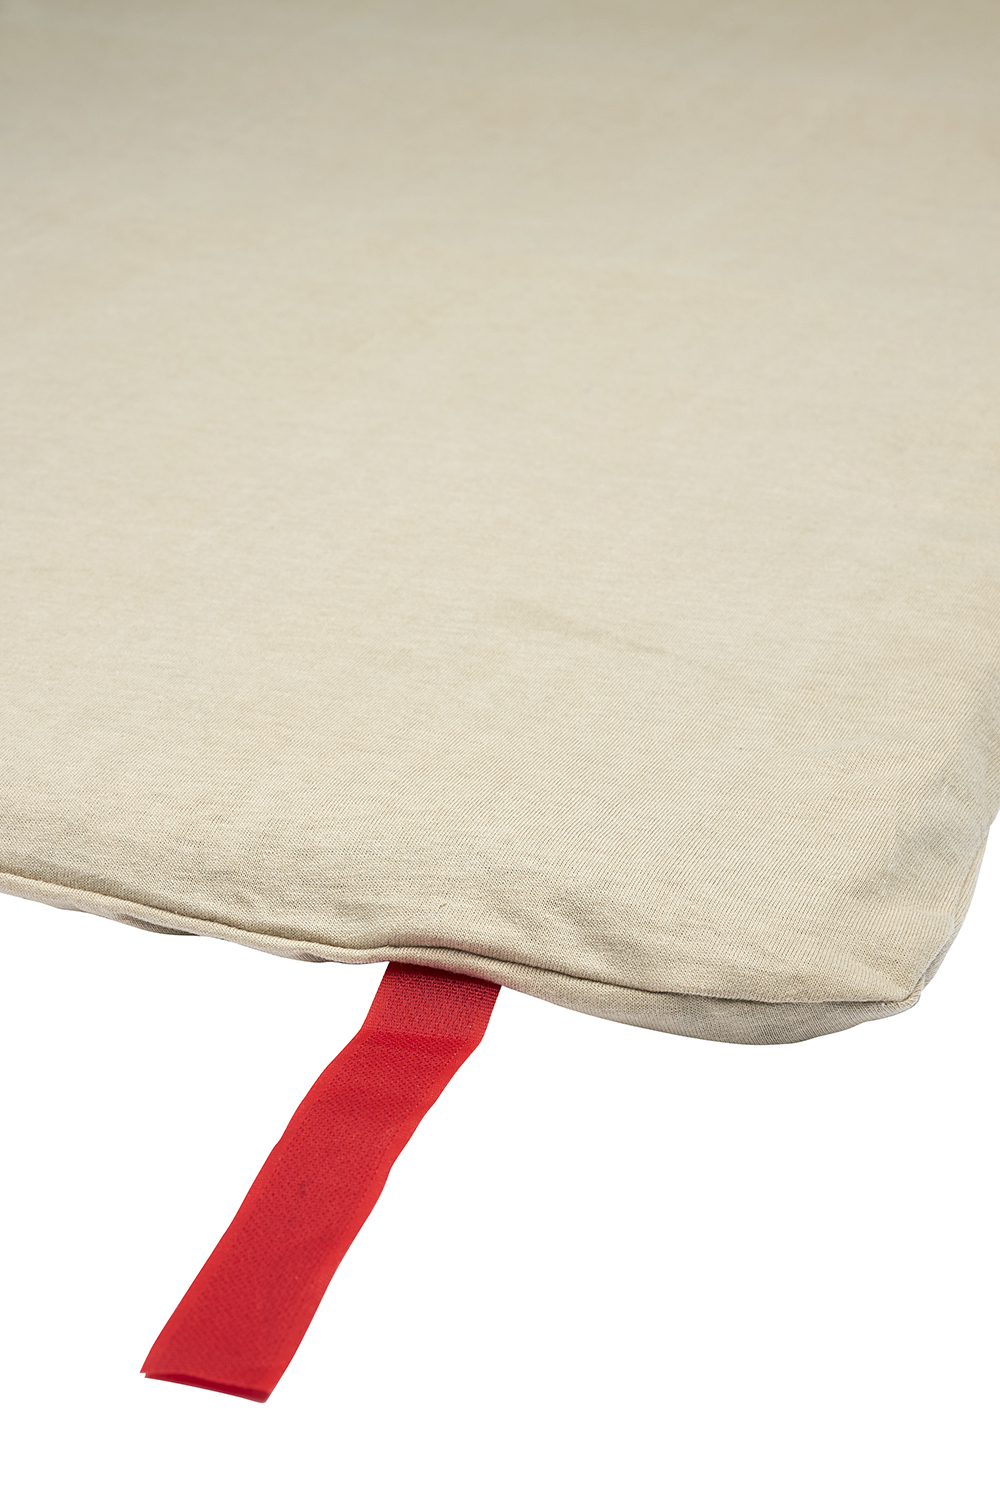 Camping bed mattress cover Uni - sand - 60x120cm